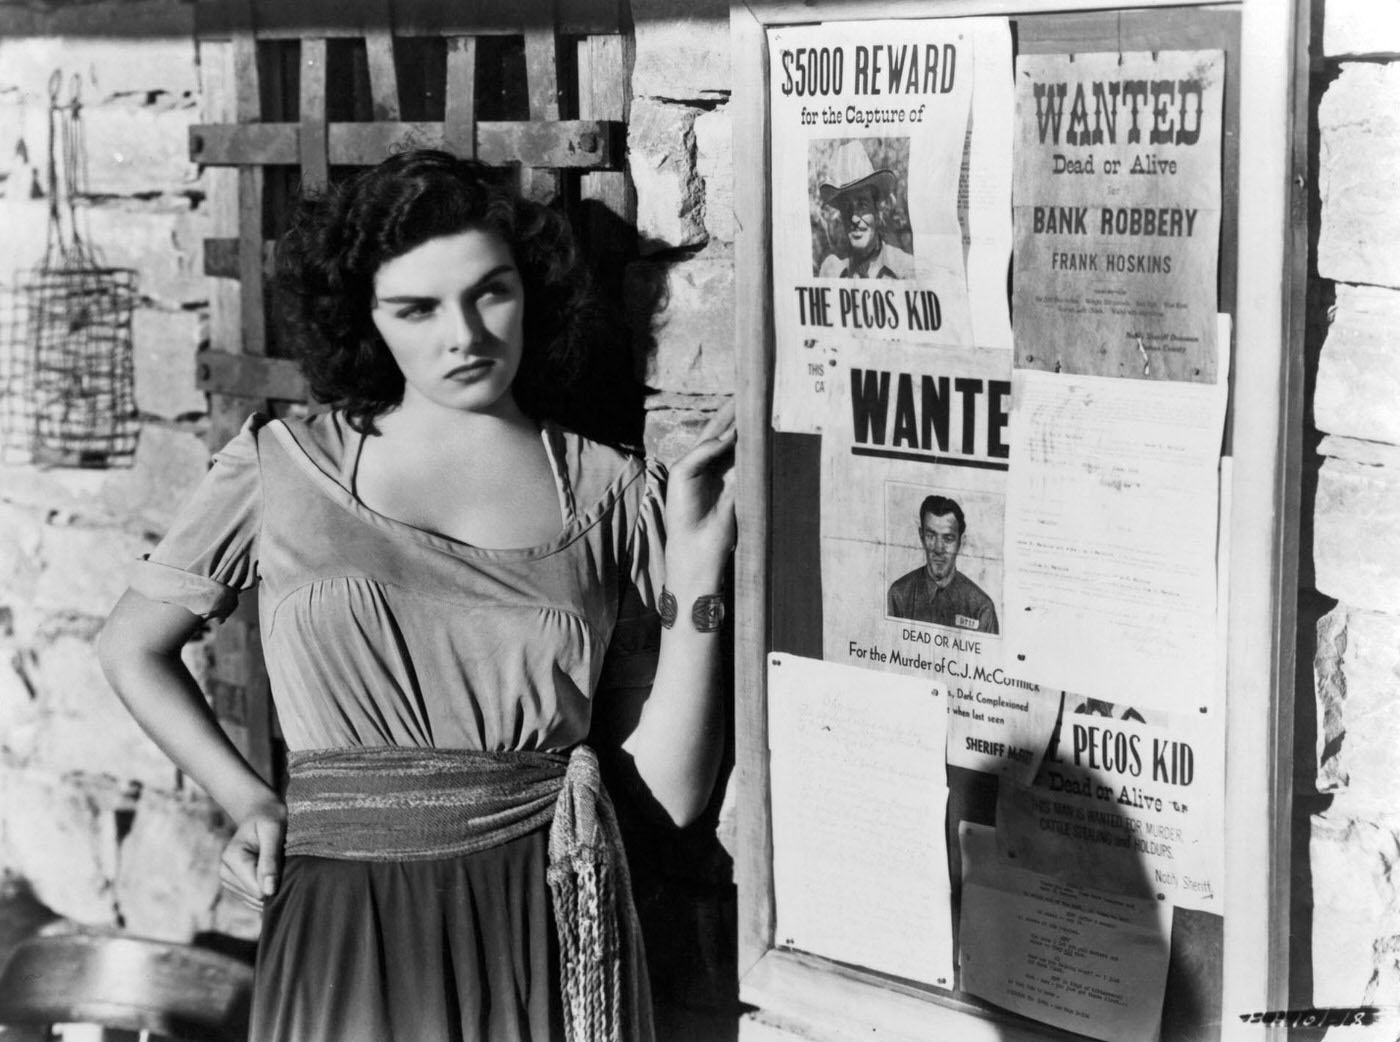 Jane Russell looking at 'Wanted' posters in a scene from the film 'The Outlaw', 1943.